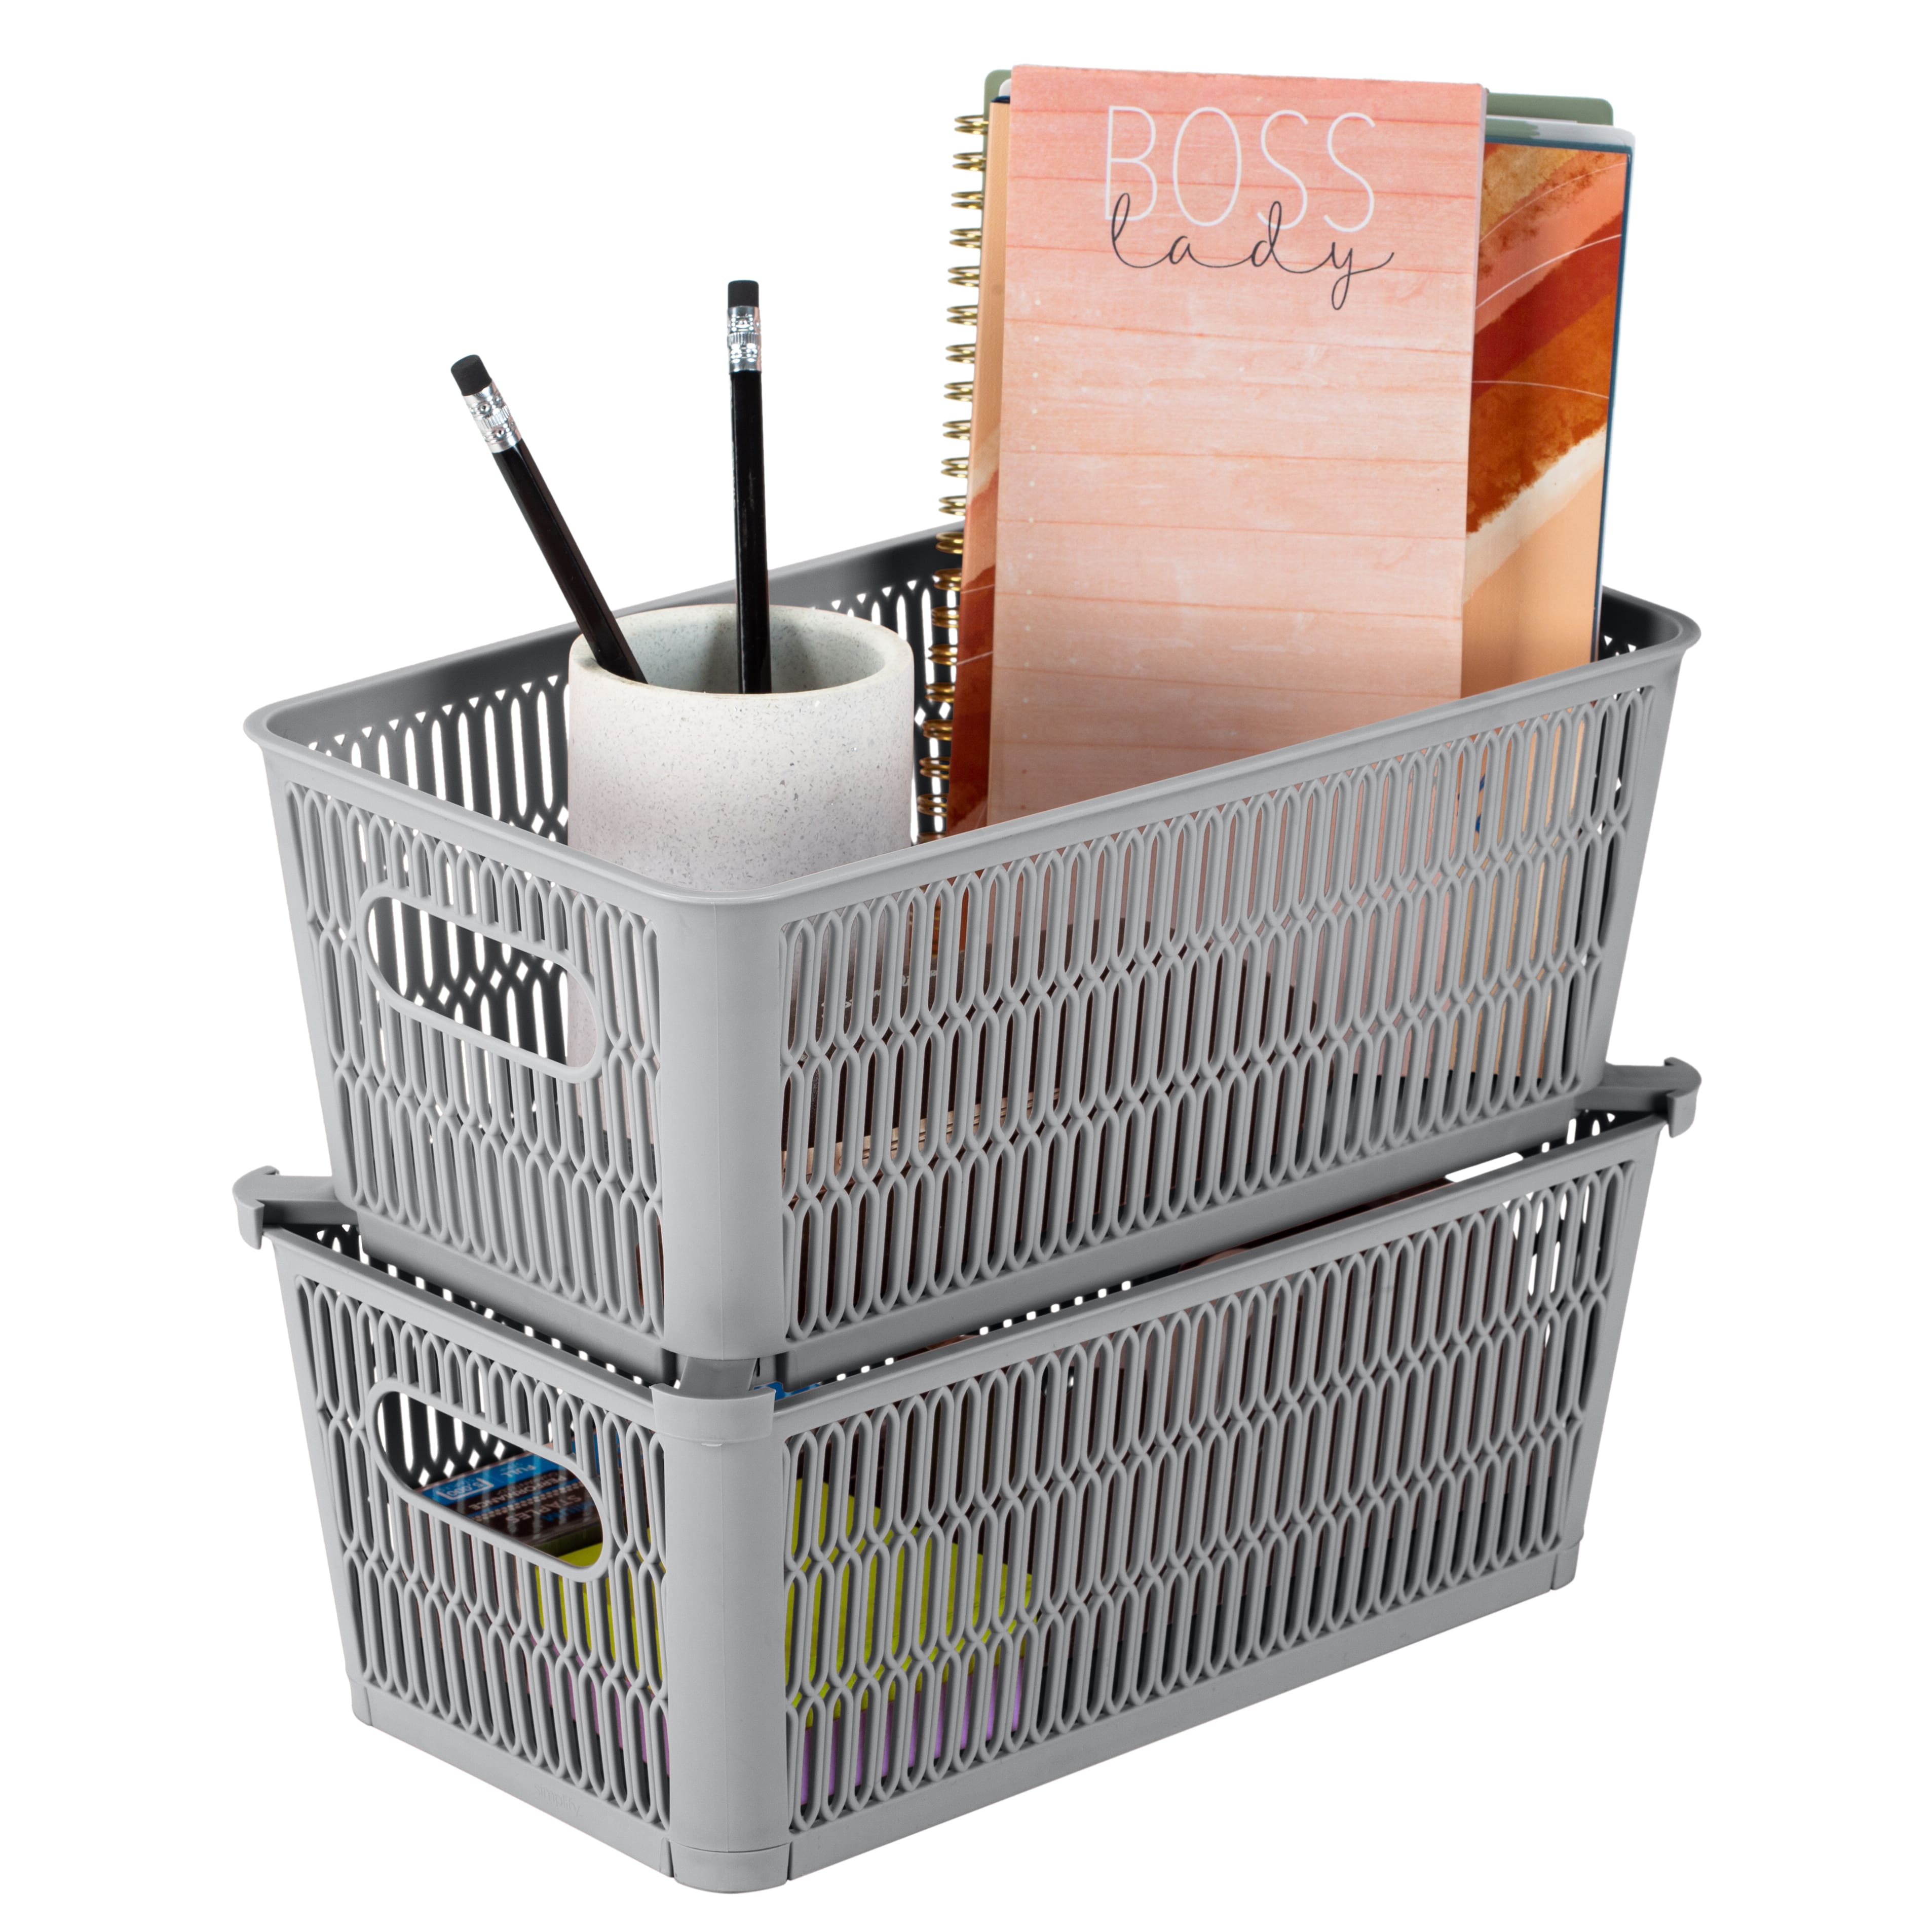 Simplify 4 Pack Slide 2 Stack It Storage Tote Baskets - Black - Small